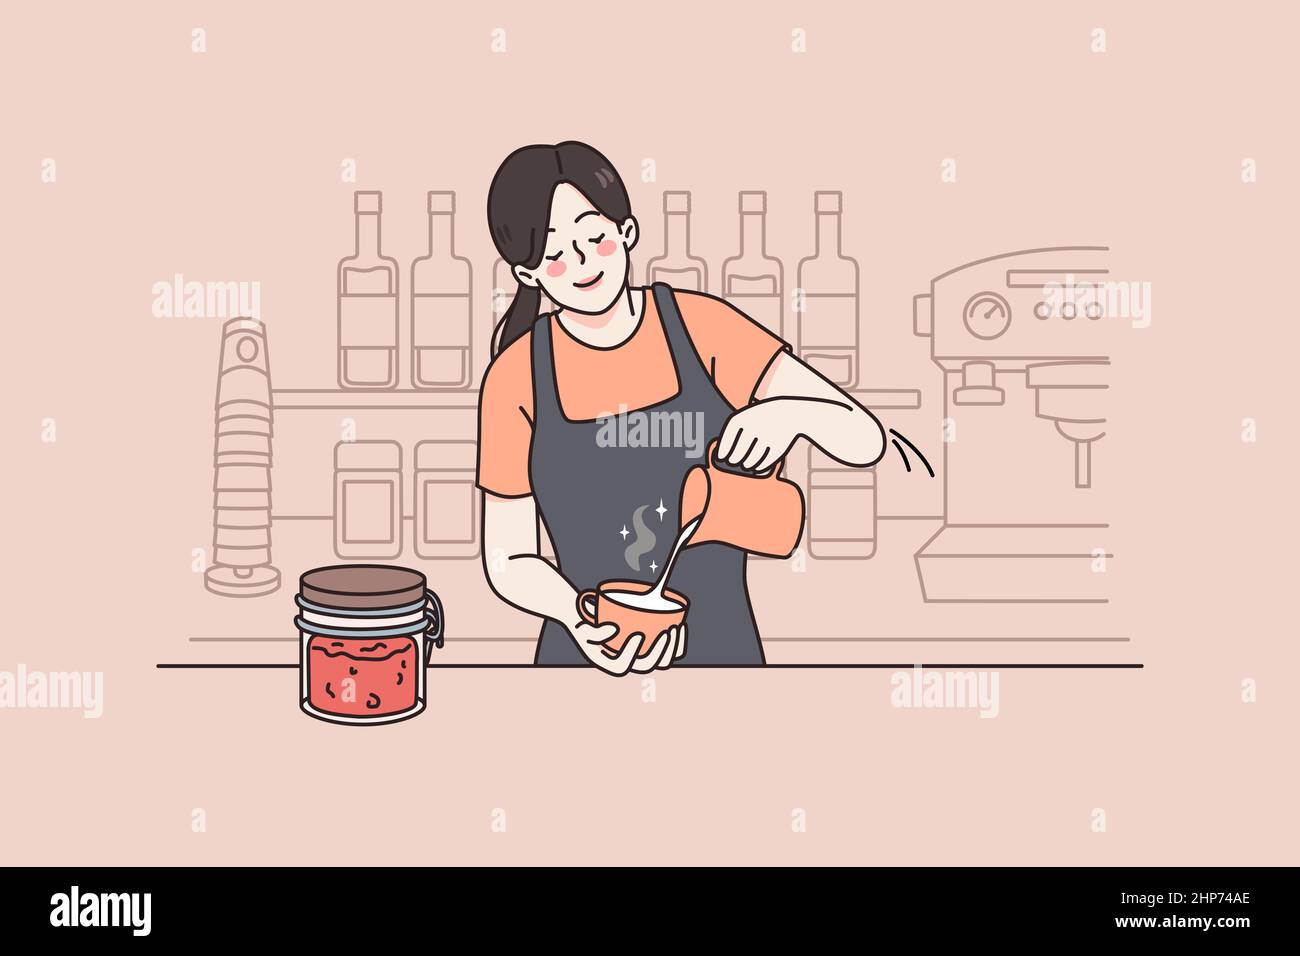 Working as barista in coffeeshop concept. Stock Vector